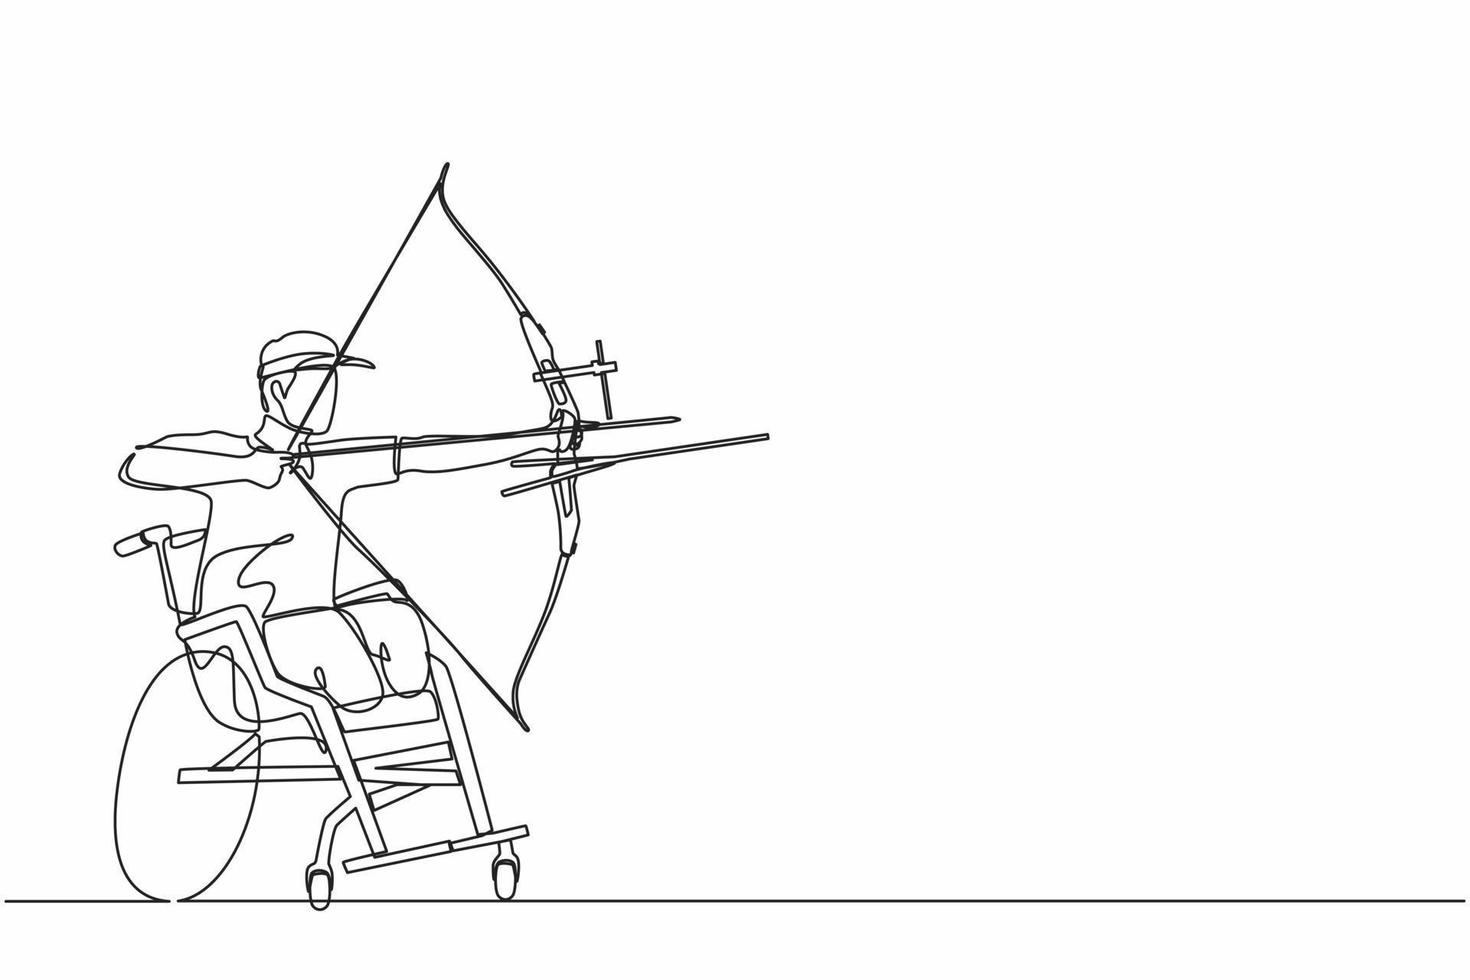 Continuous one line drawing disabled archer male athlete aiming with sports bow. Archery sport equipment for athletes. Disability archer man aiming an arrow. Single line draw design vector graphic